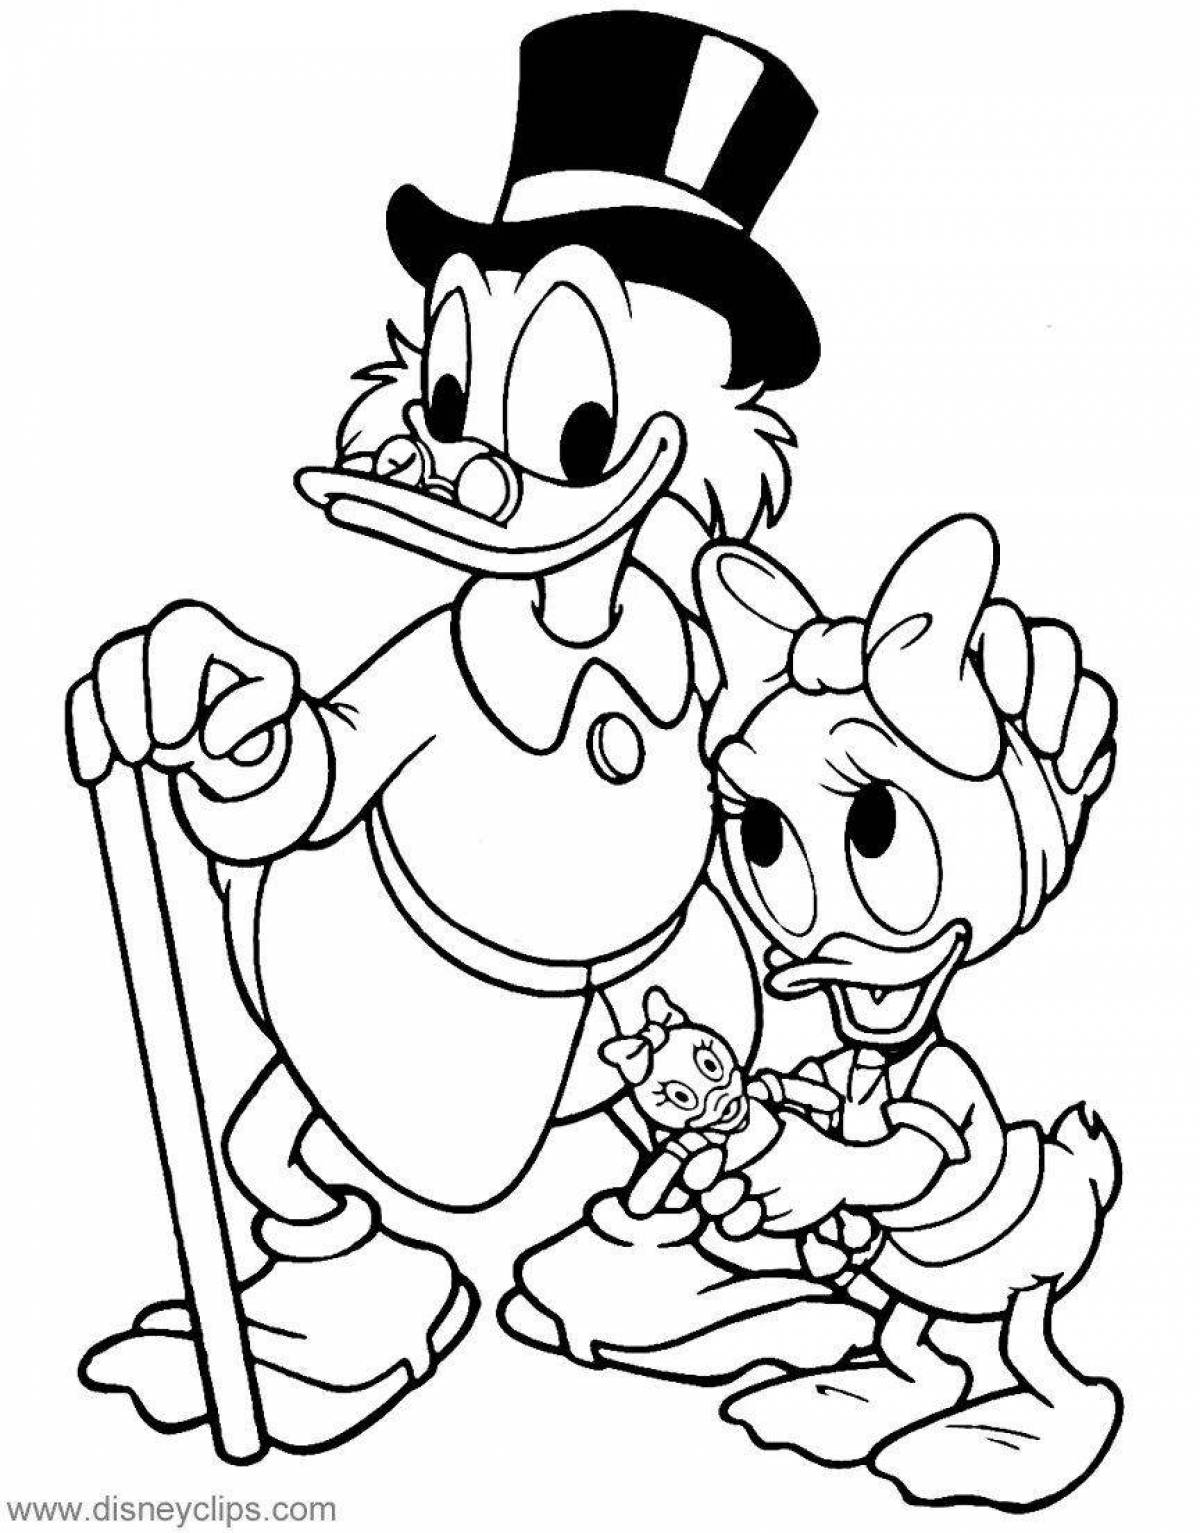 Awesome scrooge coloring page